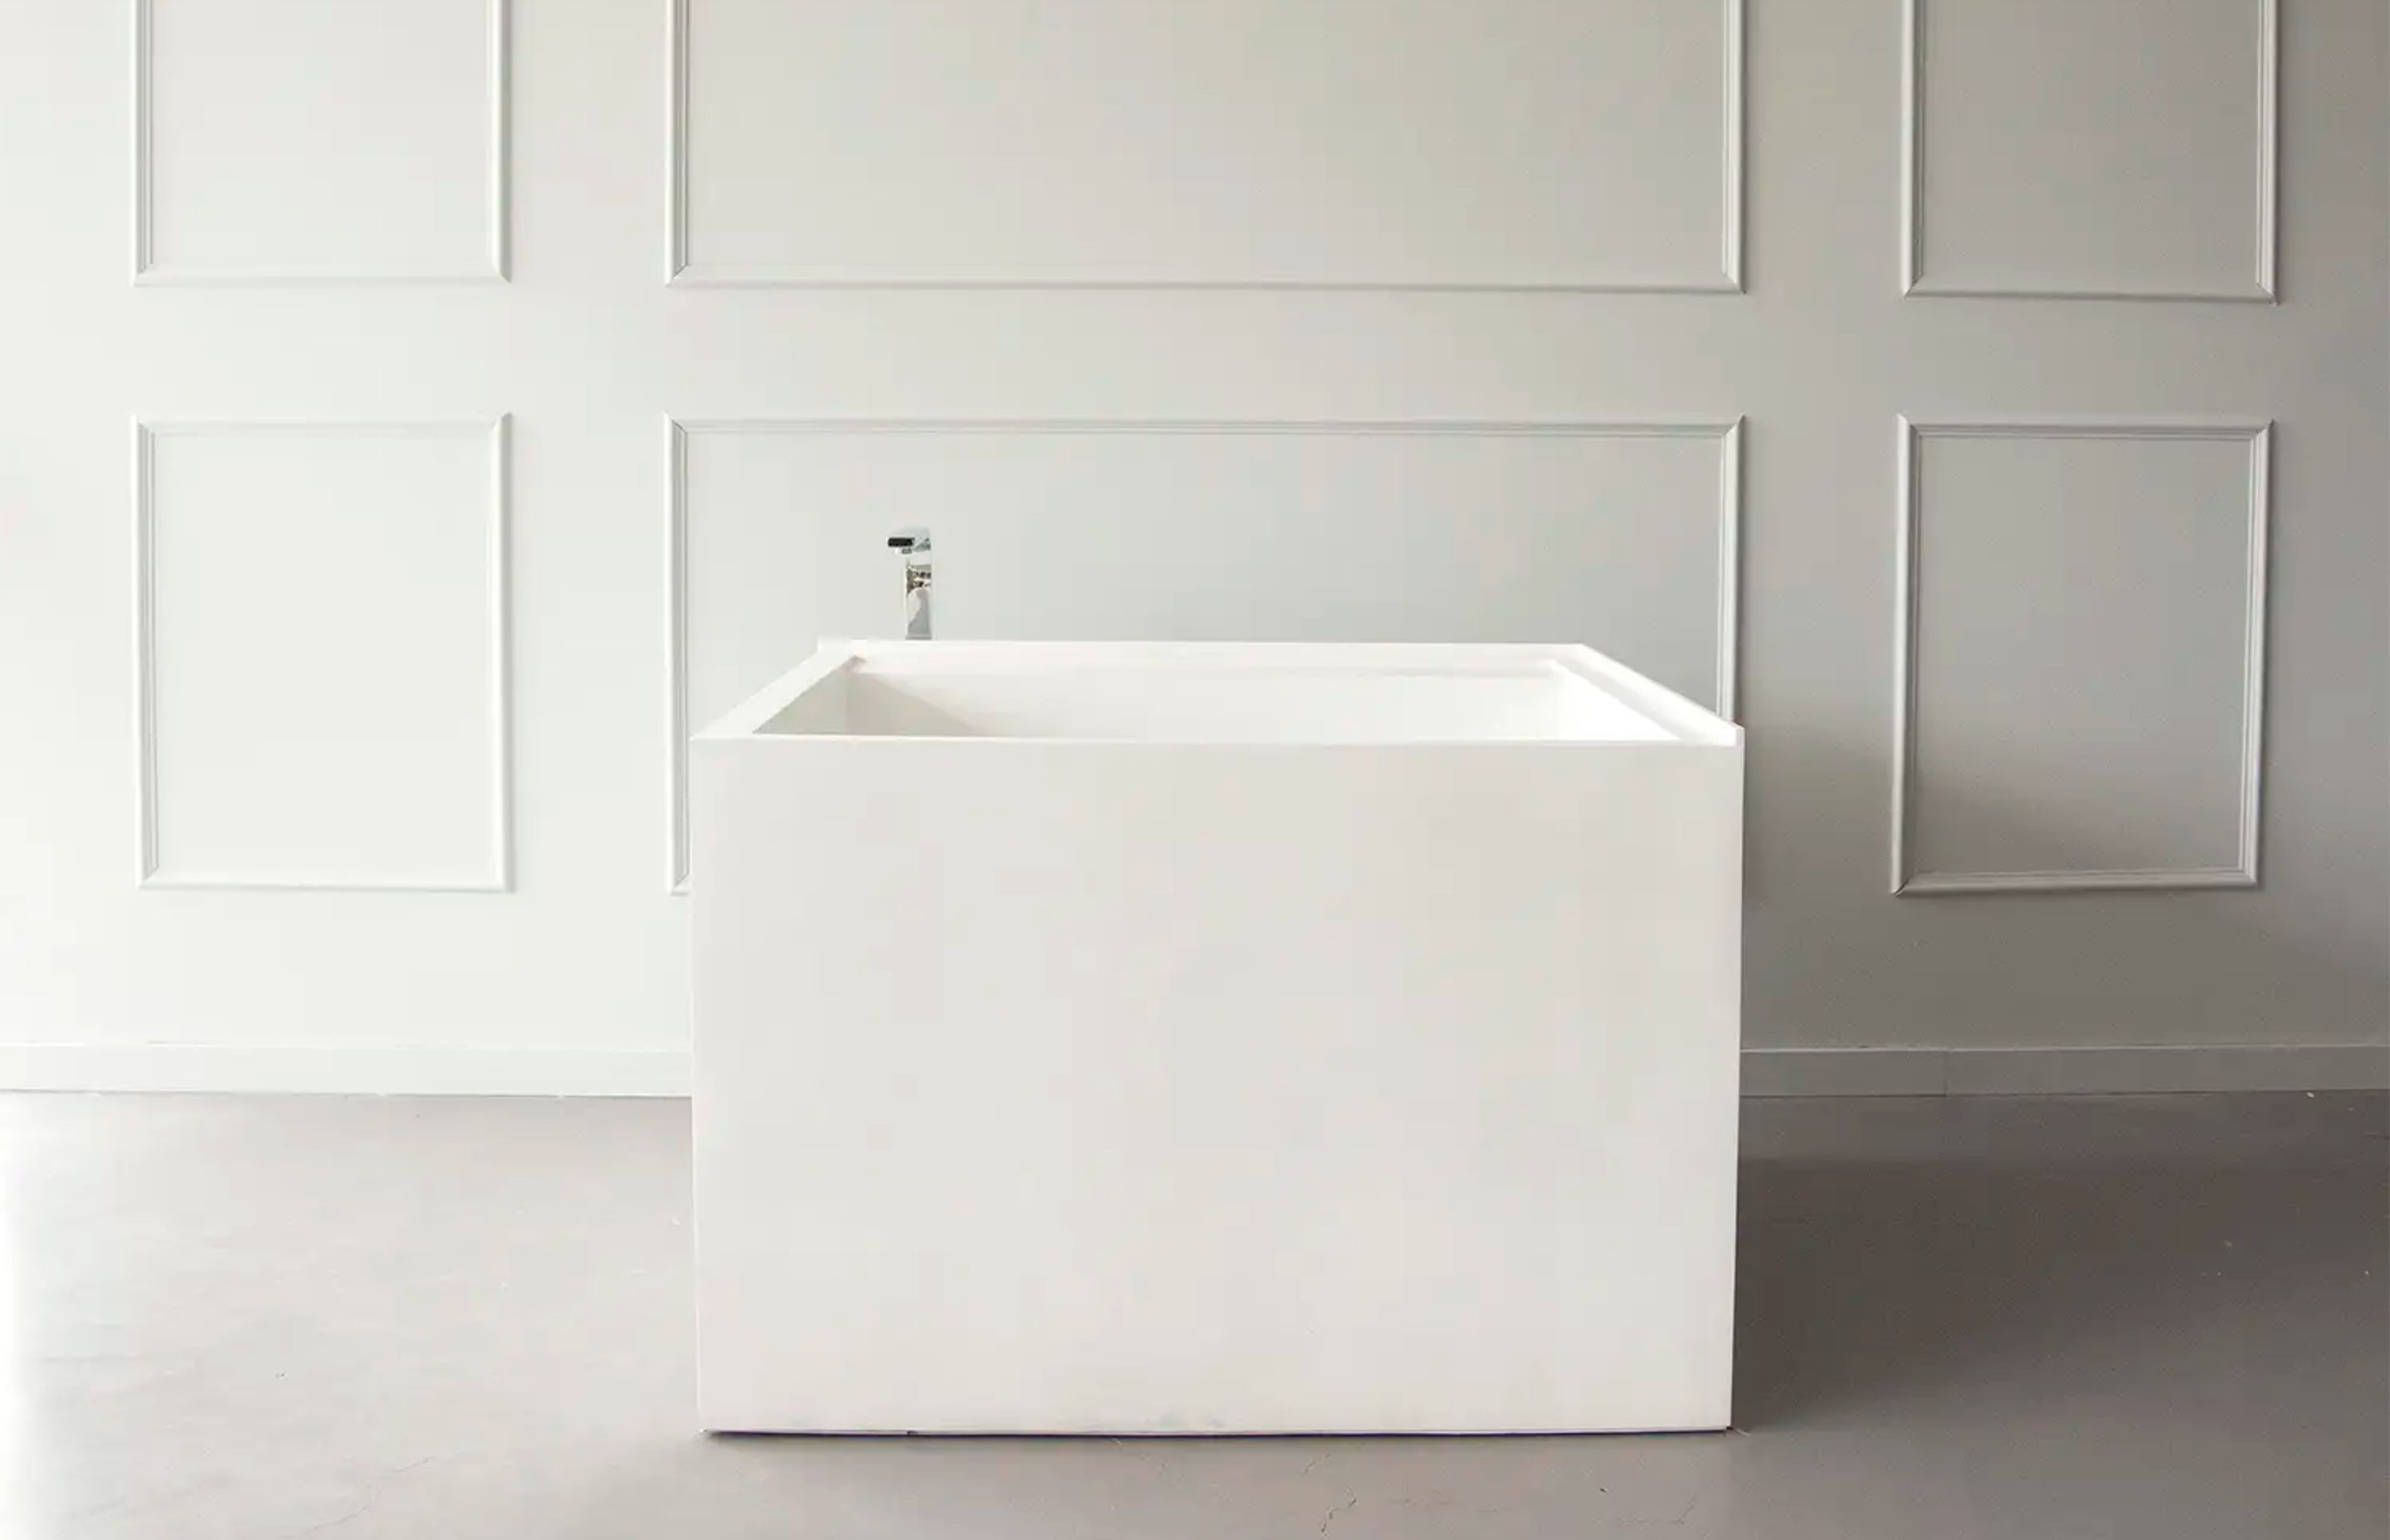 Japanese soaking tubs allow users to sit immersed to chest-height in the water.